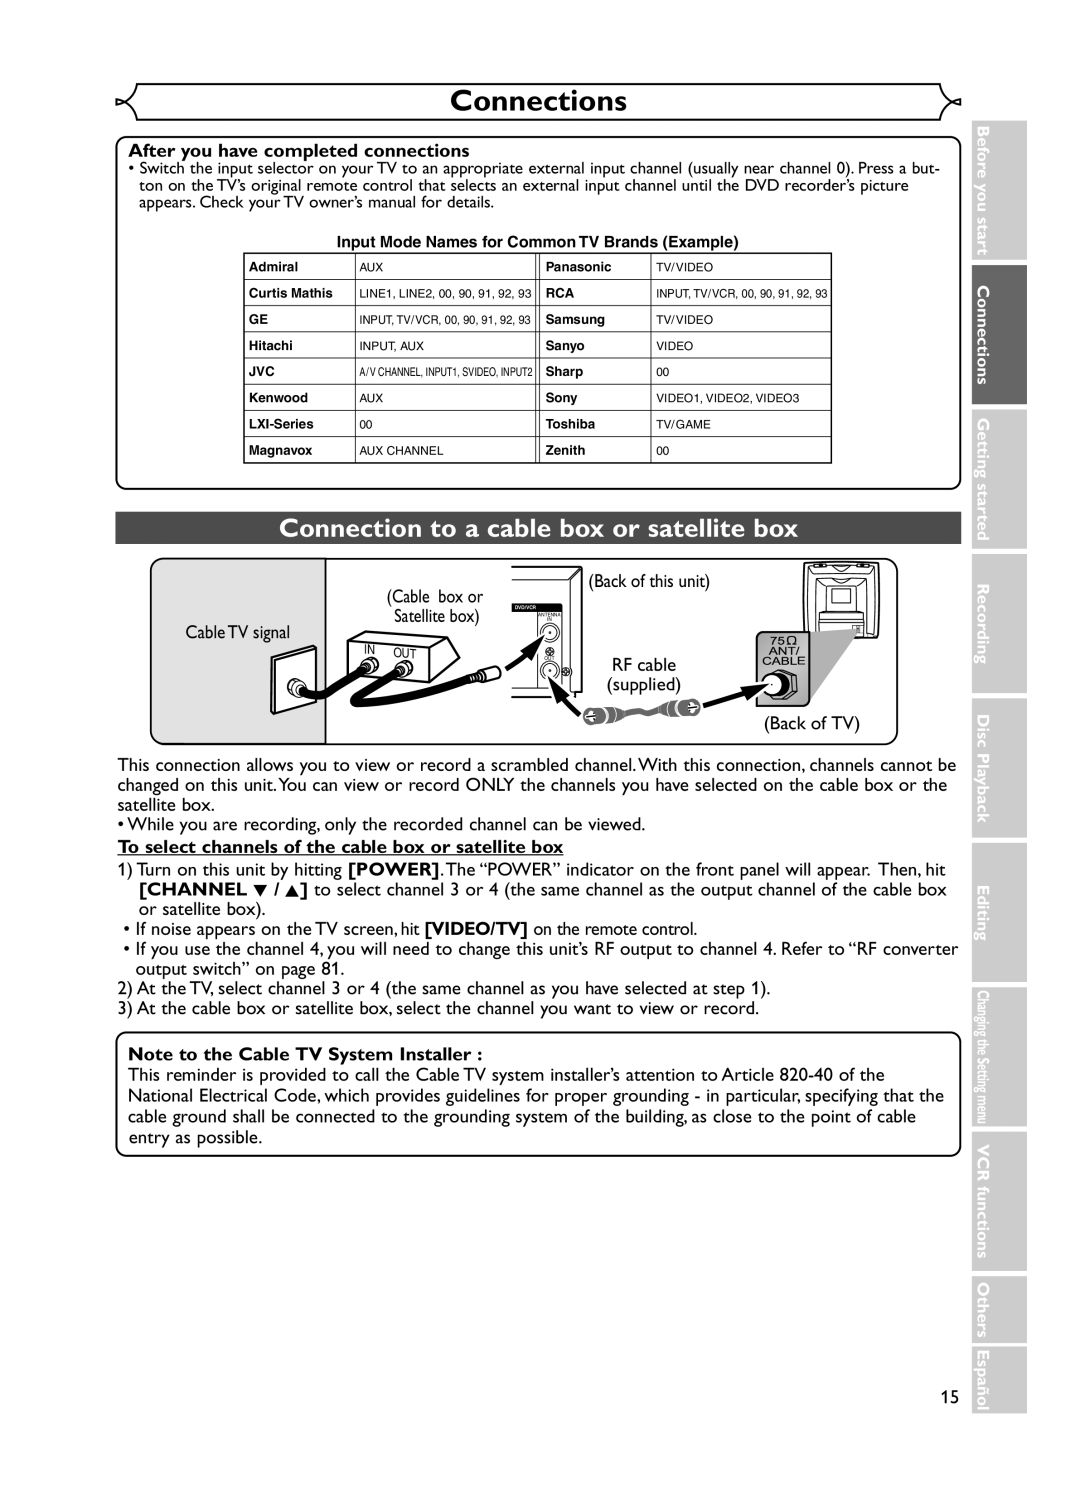 Emerson EWR20V5 owner manual Connections, Connection to a cable box or satellite box, After you have completed connections 